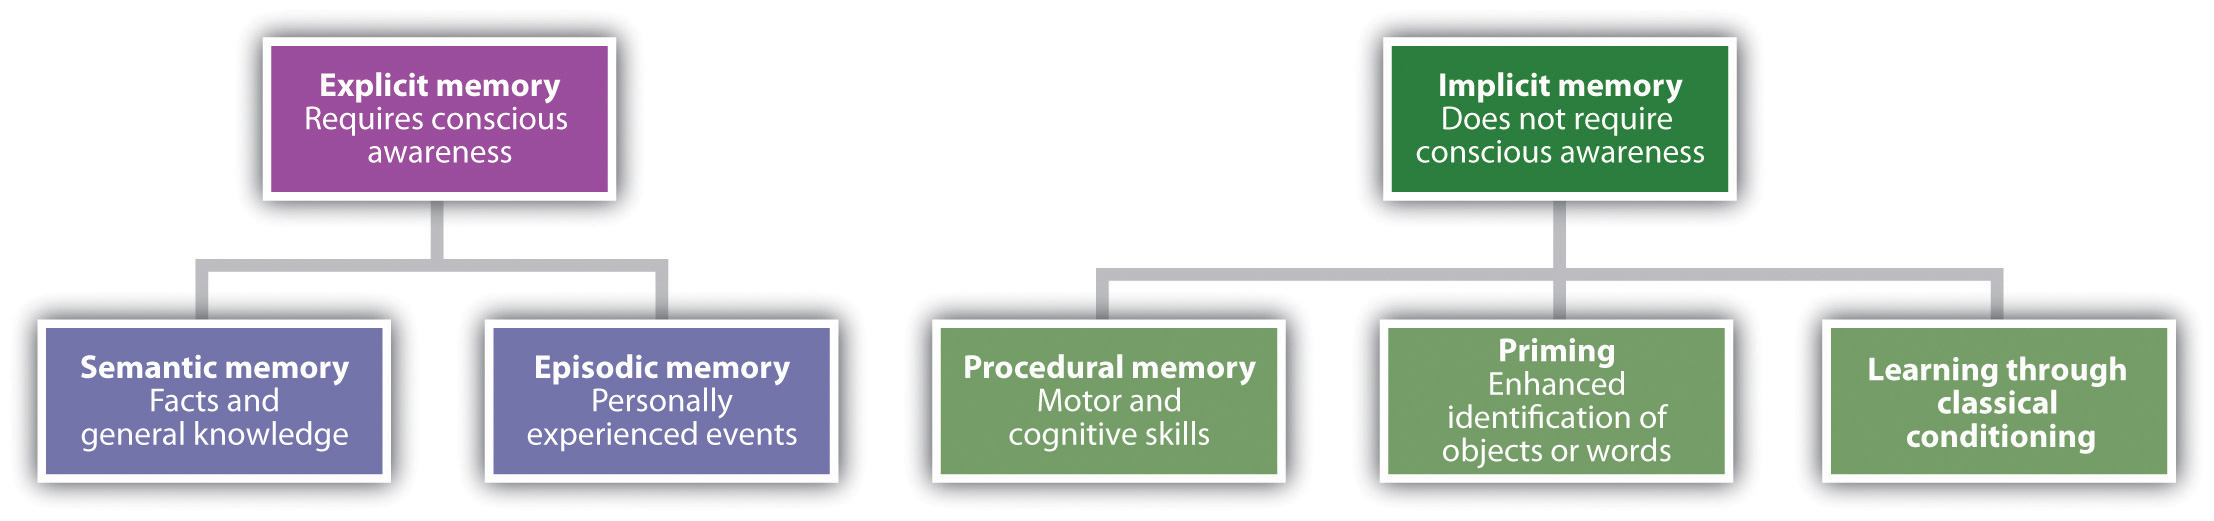 Explicit memory: semantic and episodic.  Implicit memory: procedural memory, priming, and classical conditioning.